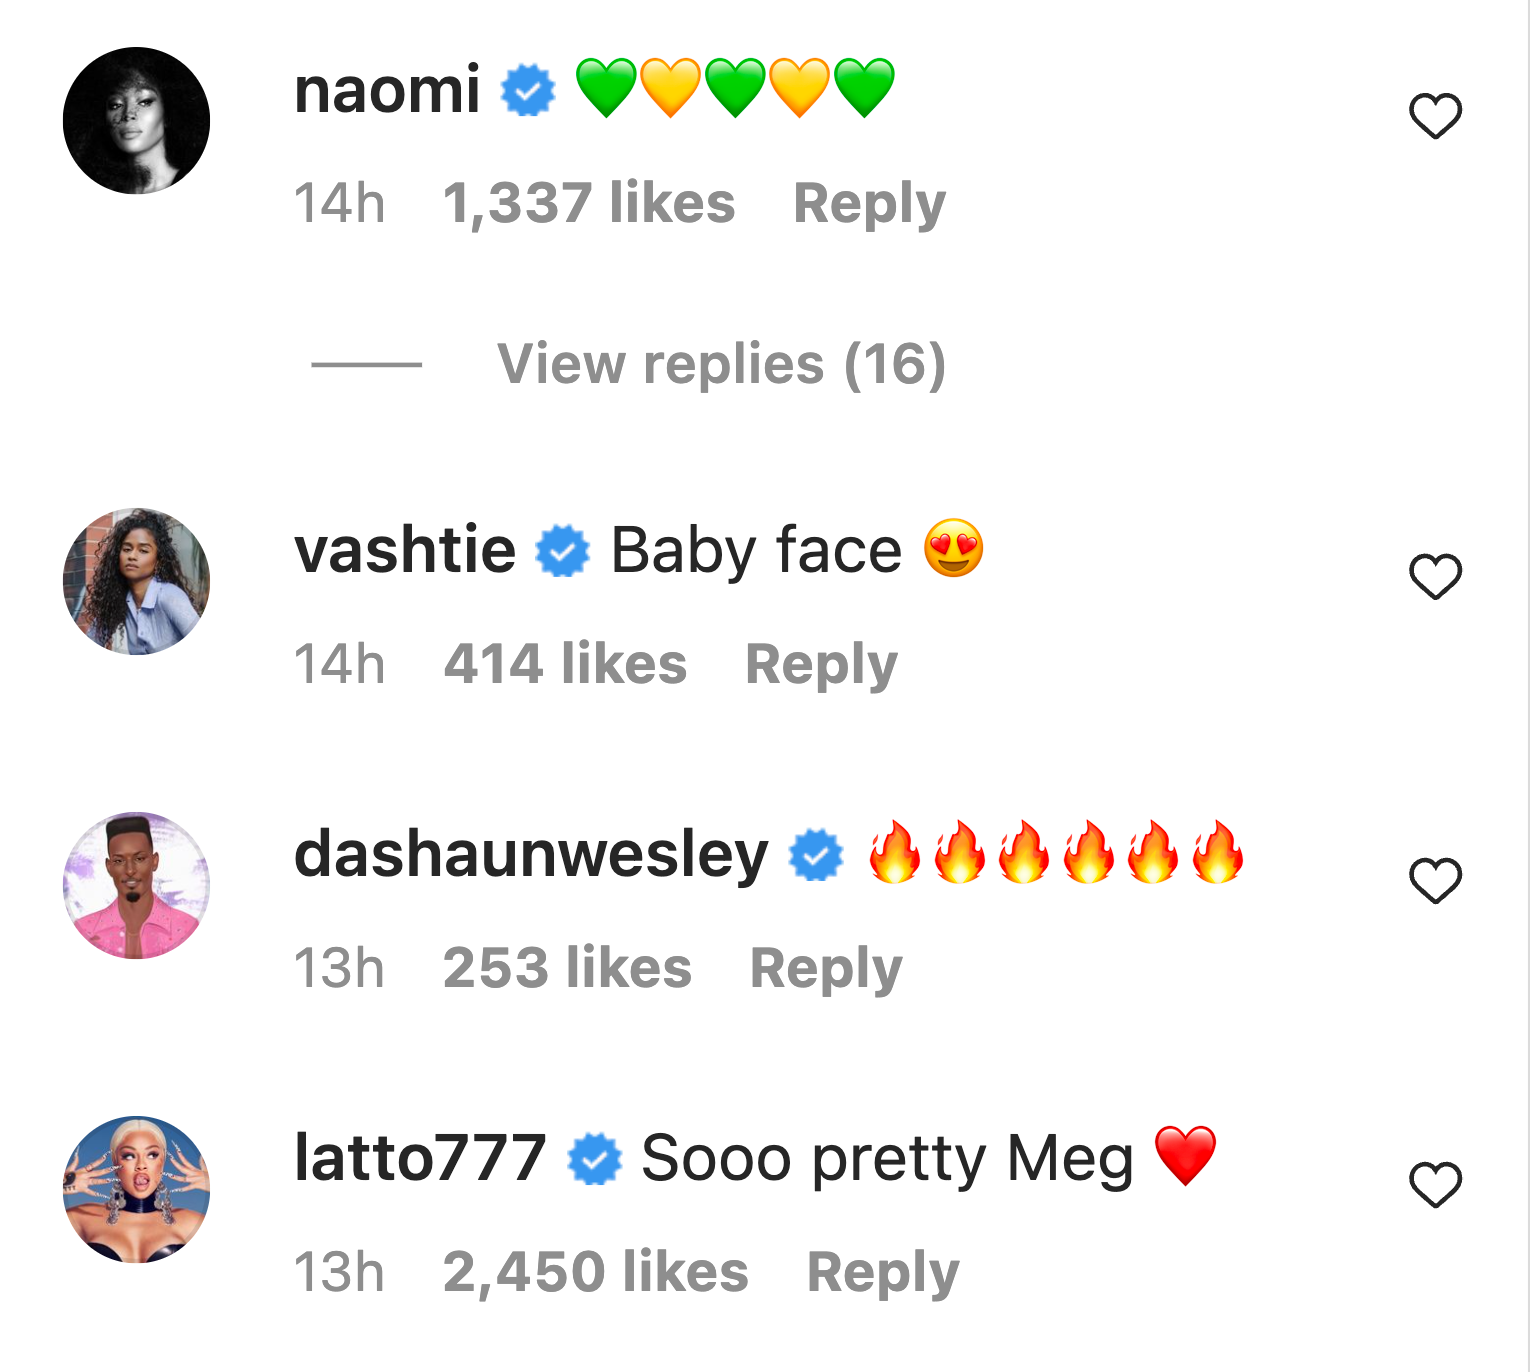 Comments on Megan Thee Stallion's Instagram